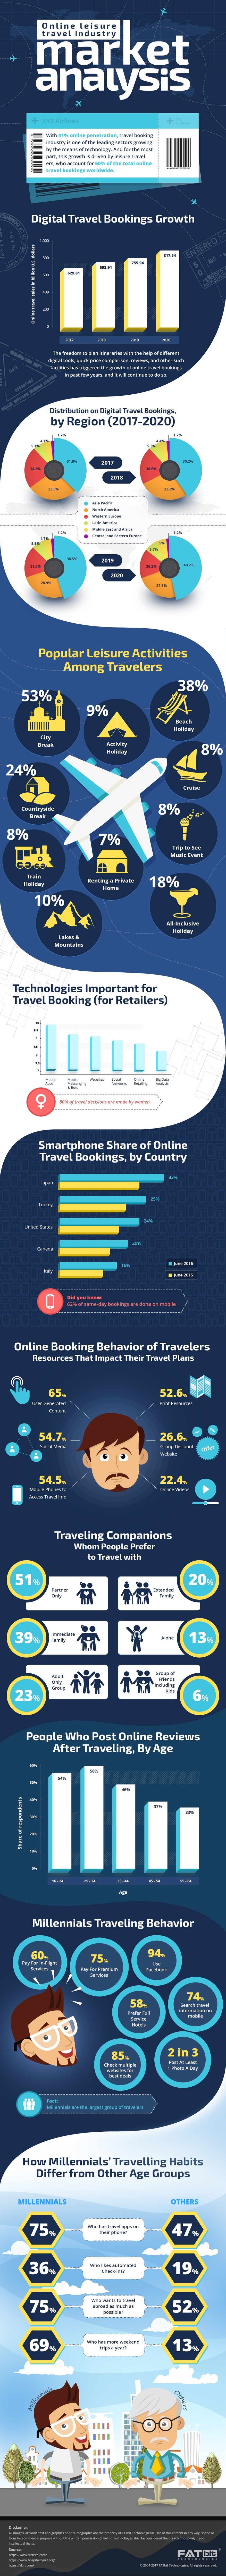 Travel Industry Market Analysis Infographic